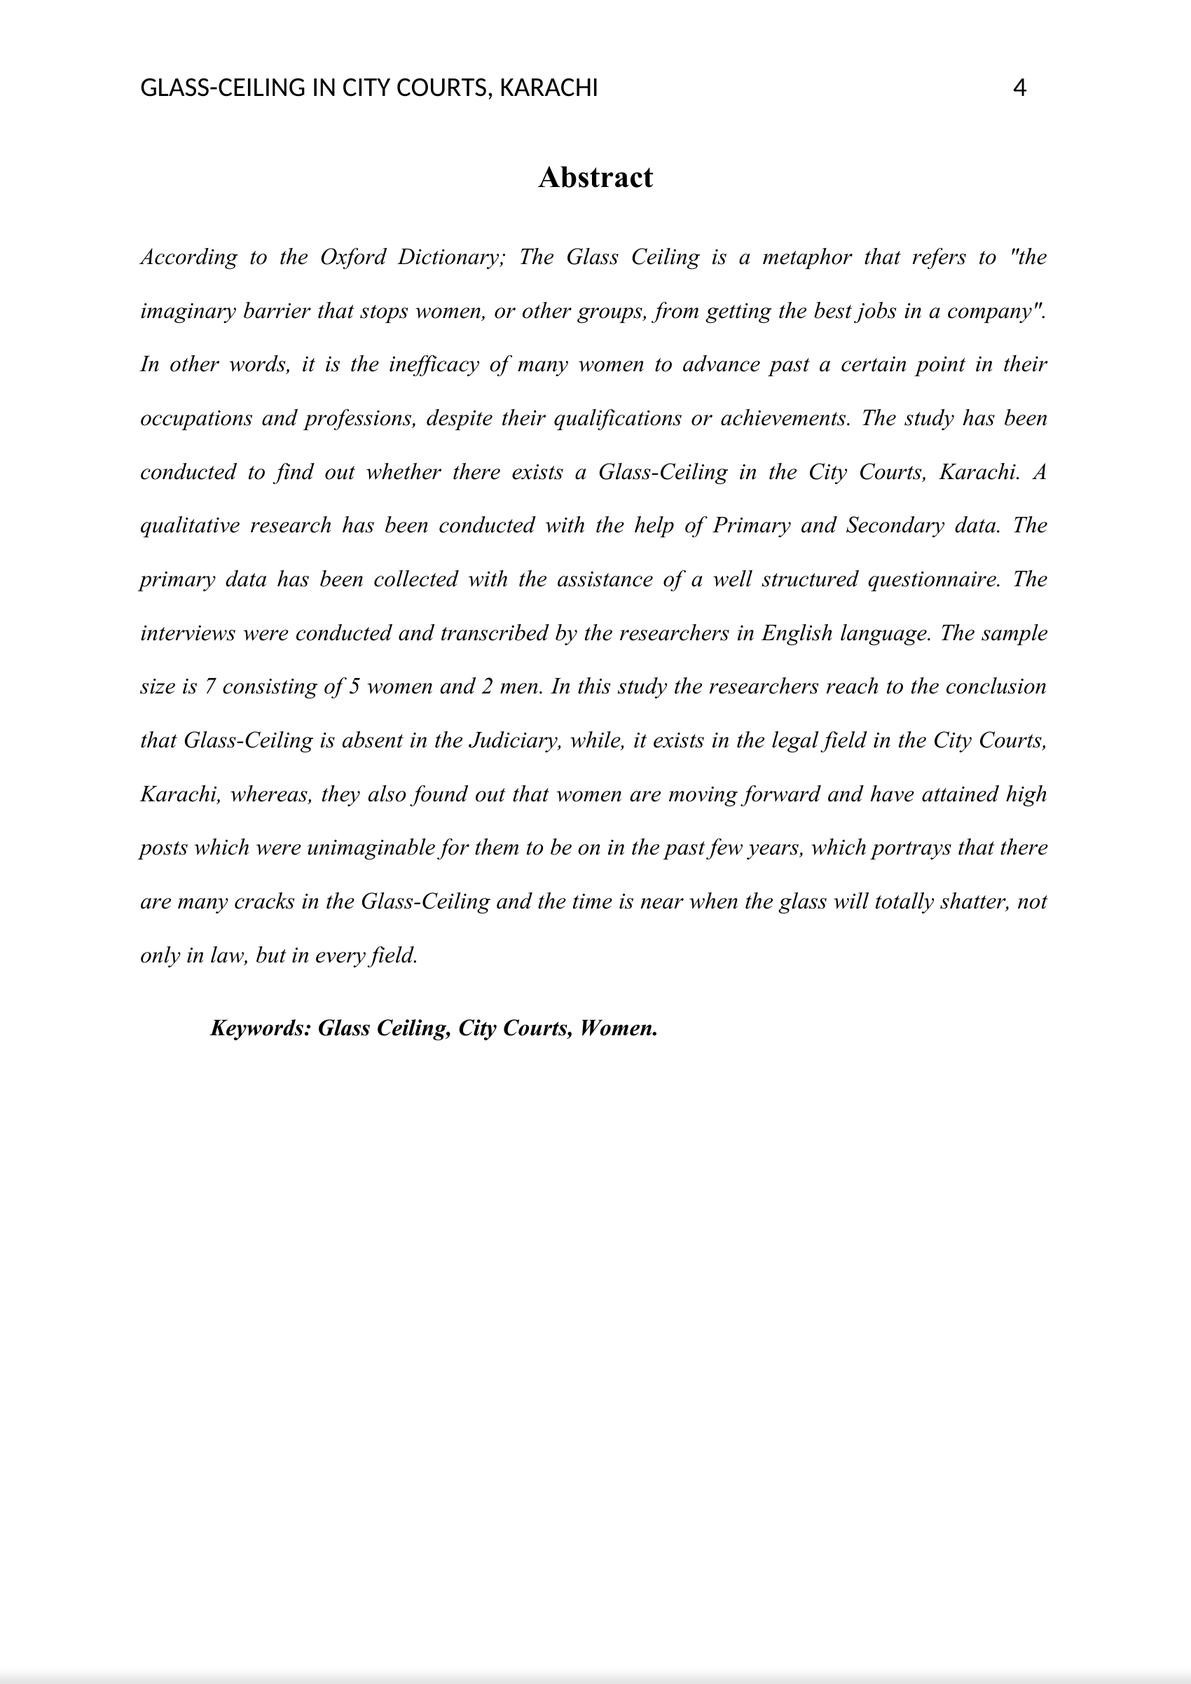 Research Paper - Existence of Glass-Ceiling in City Courts, Karachi-4